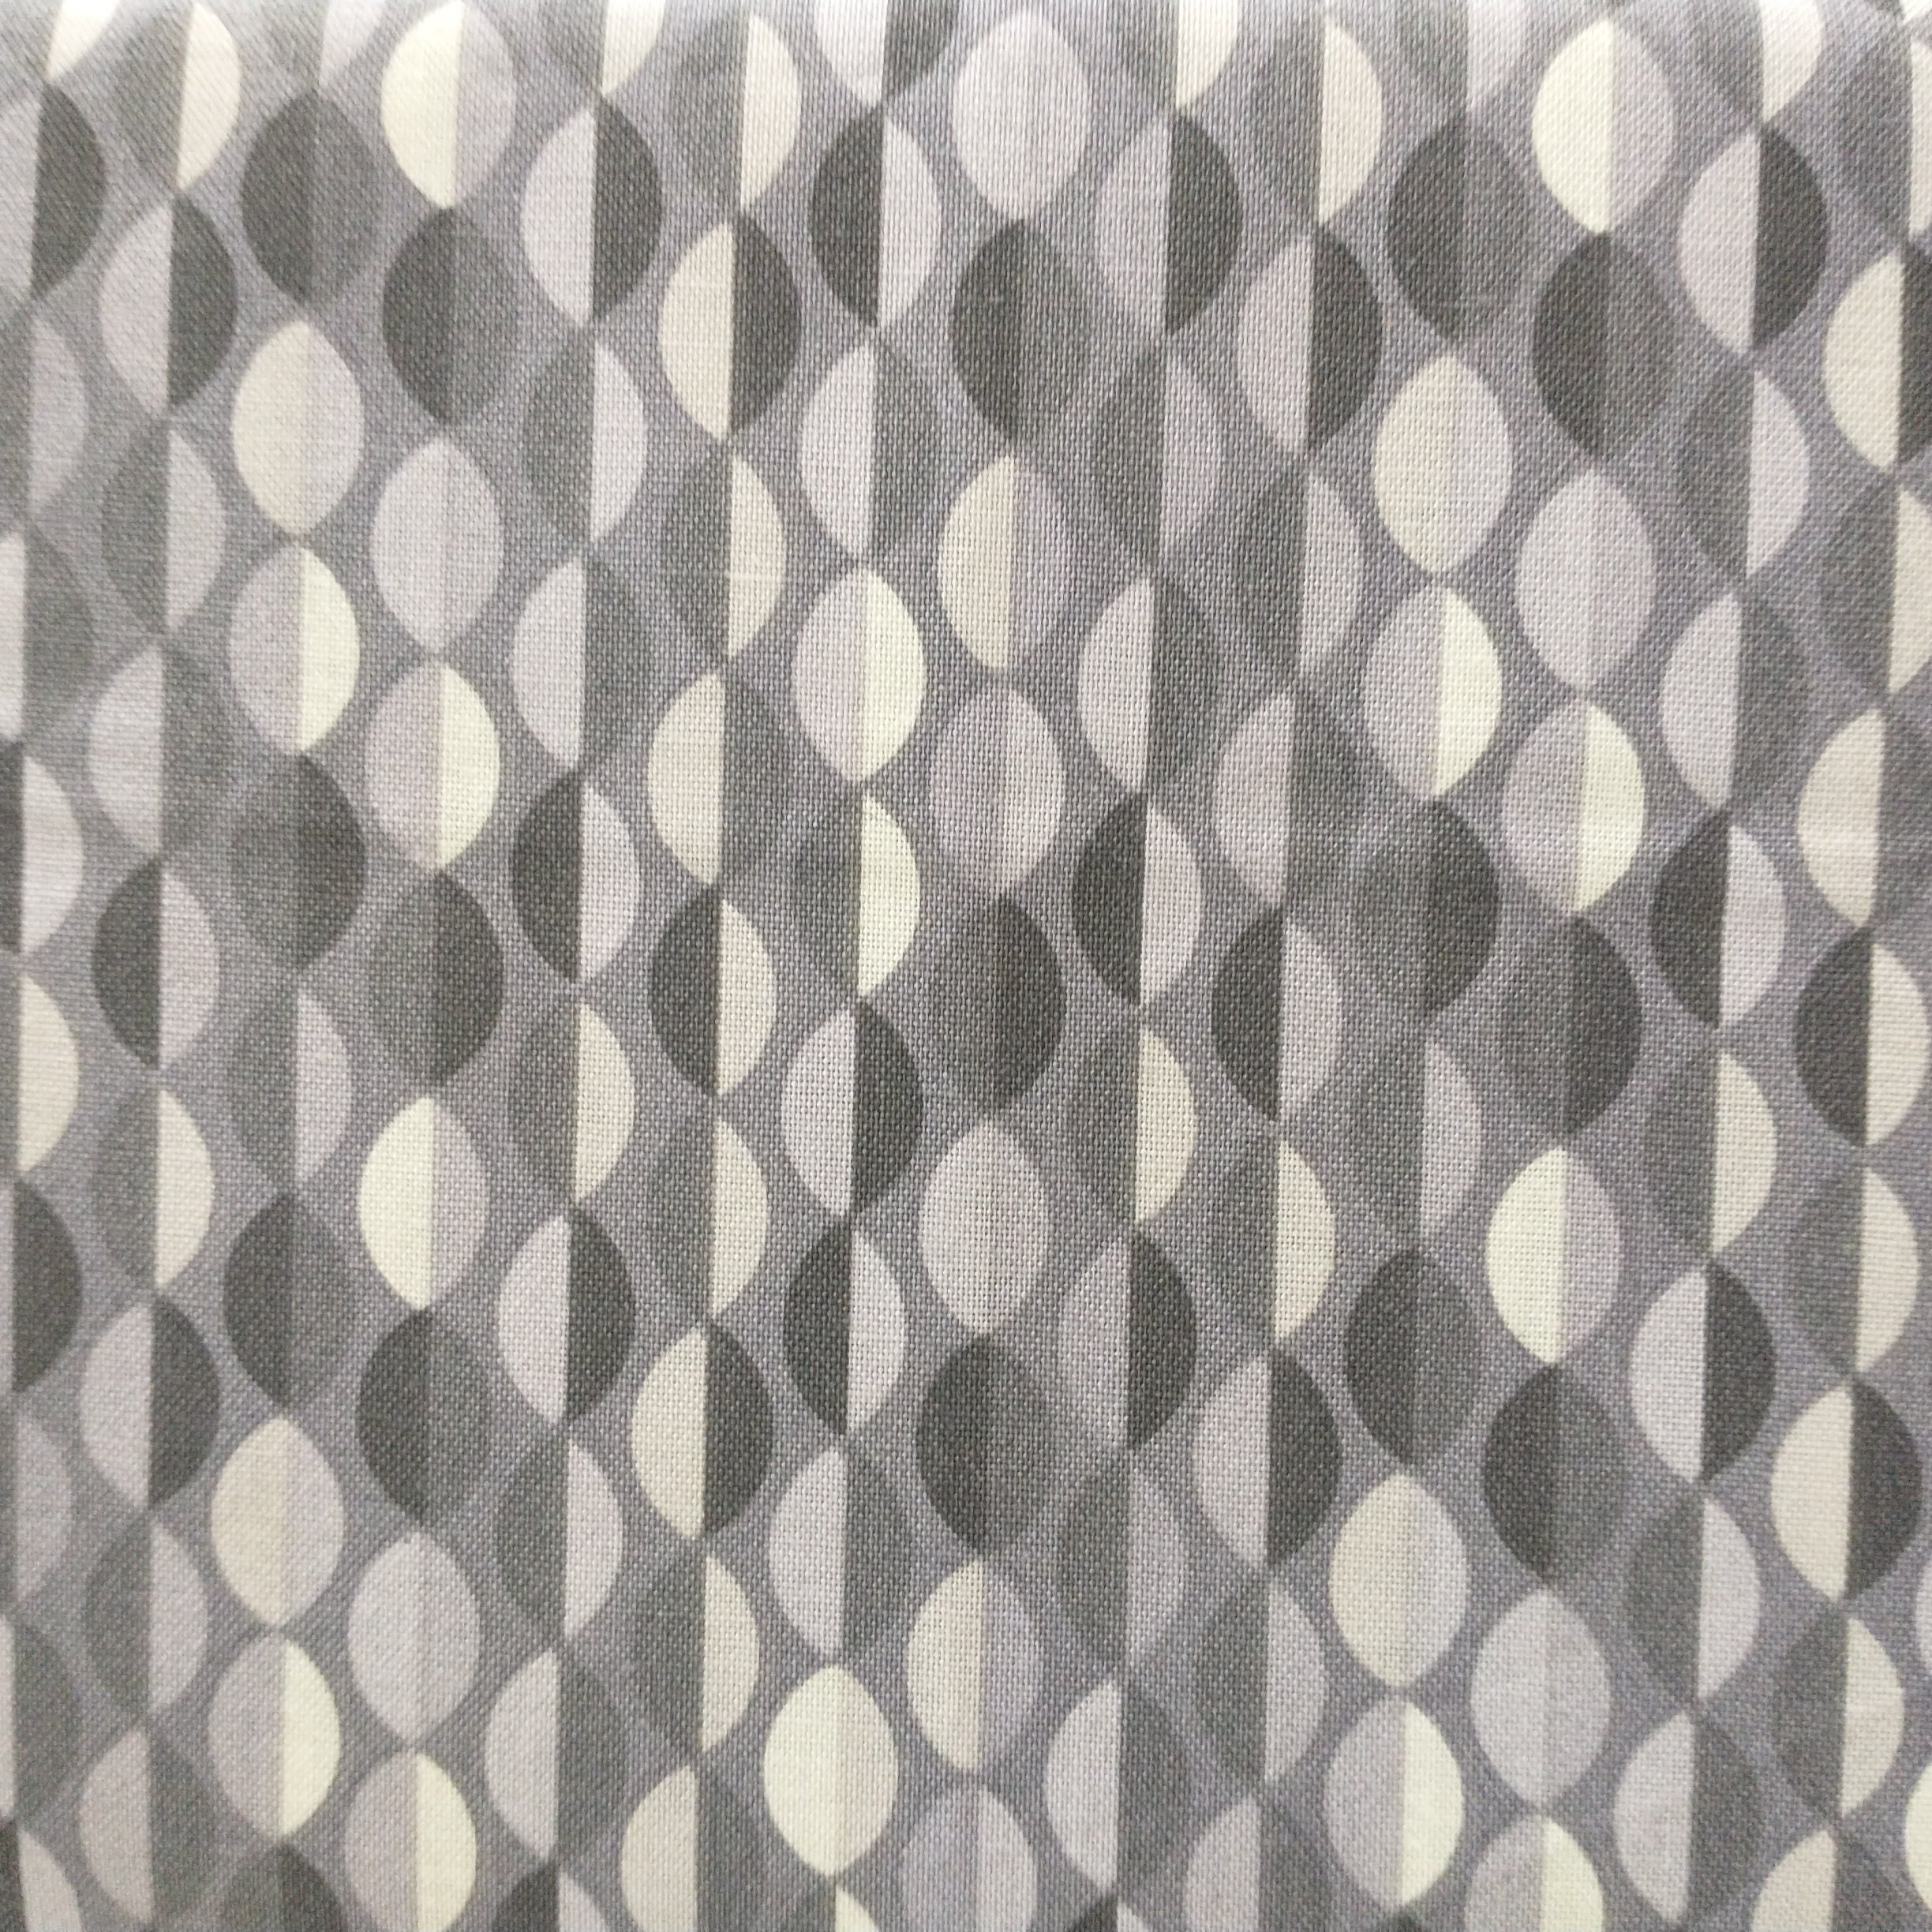 Gray fabric by the yard, gray basket weave fabric by the yard, gray cotton  fabric, grey fabric, gray fabric basics, gray and white, #20472